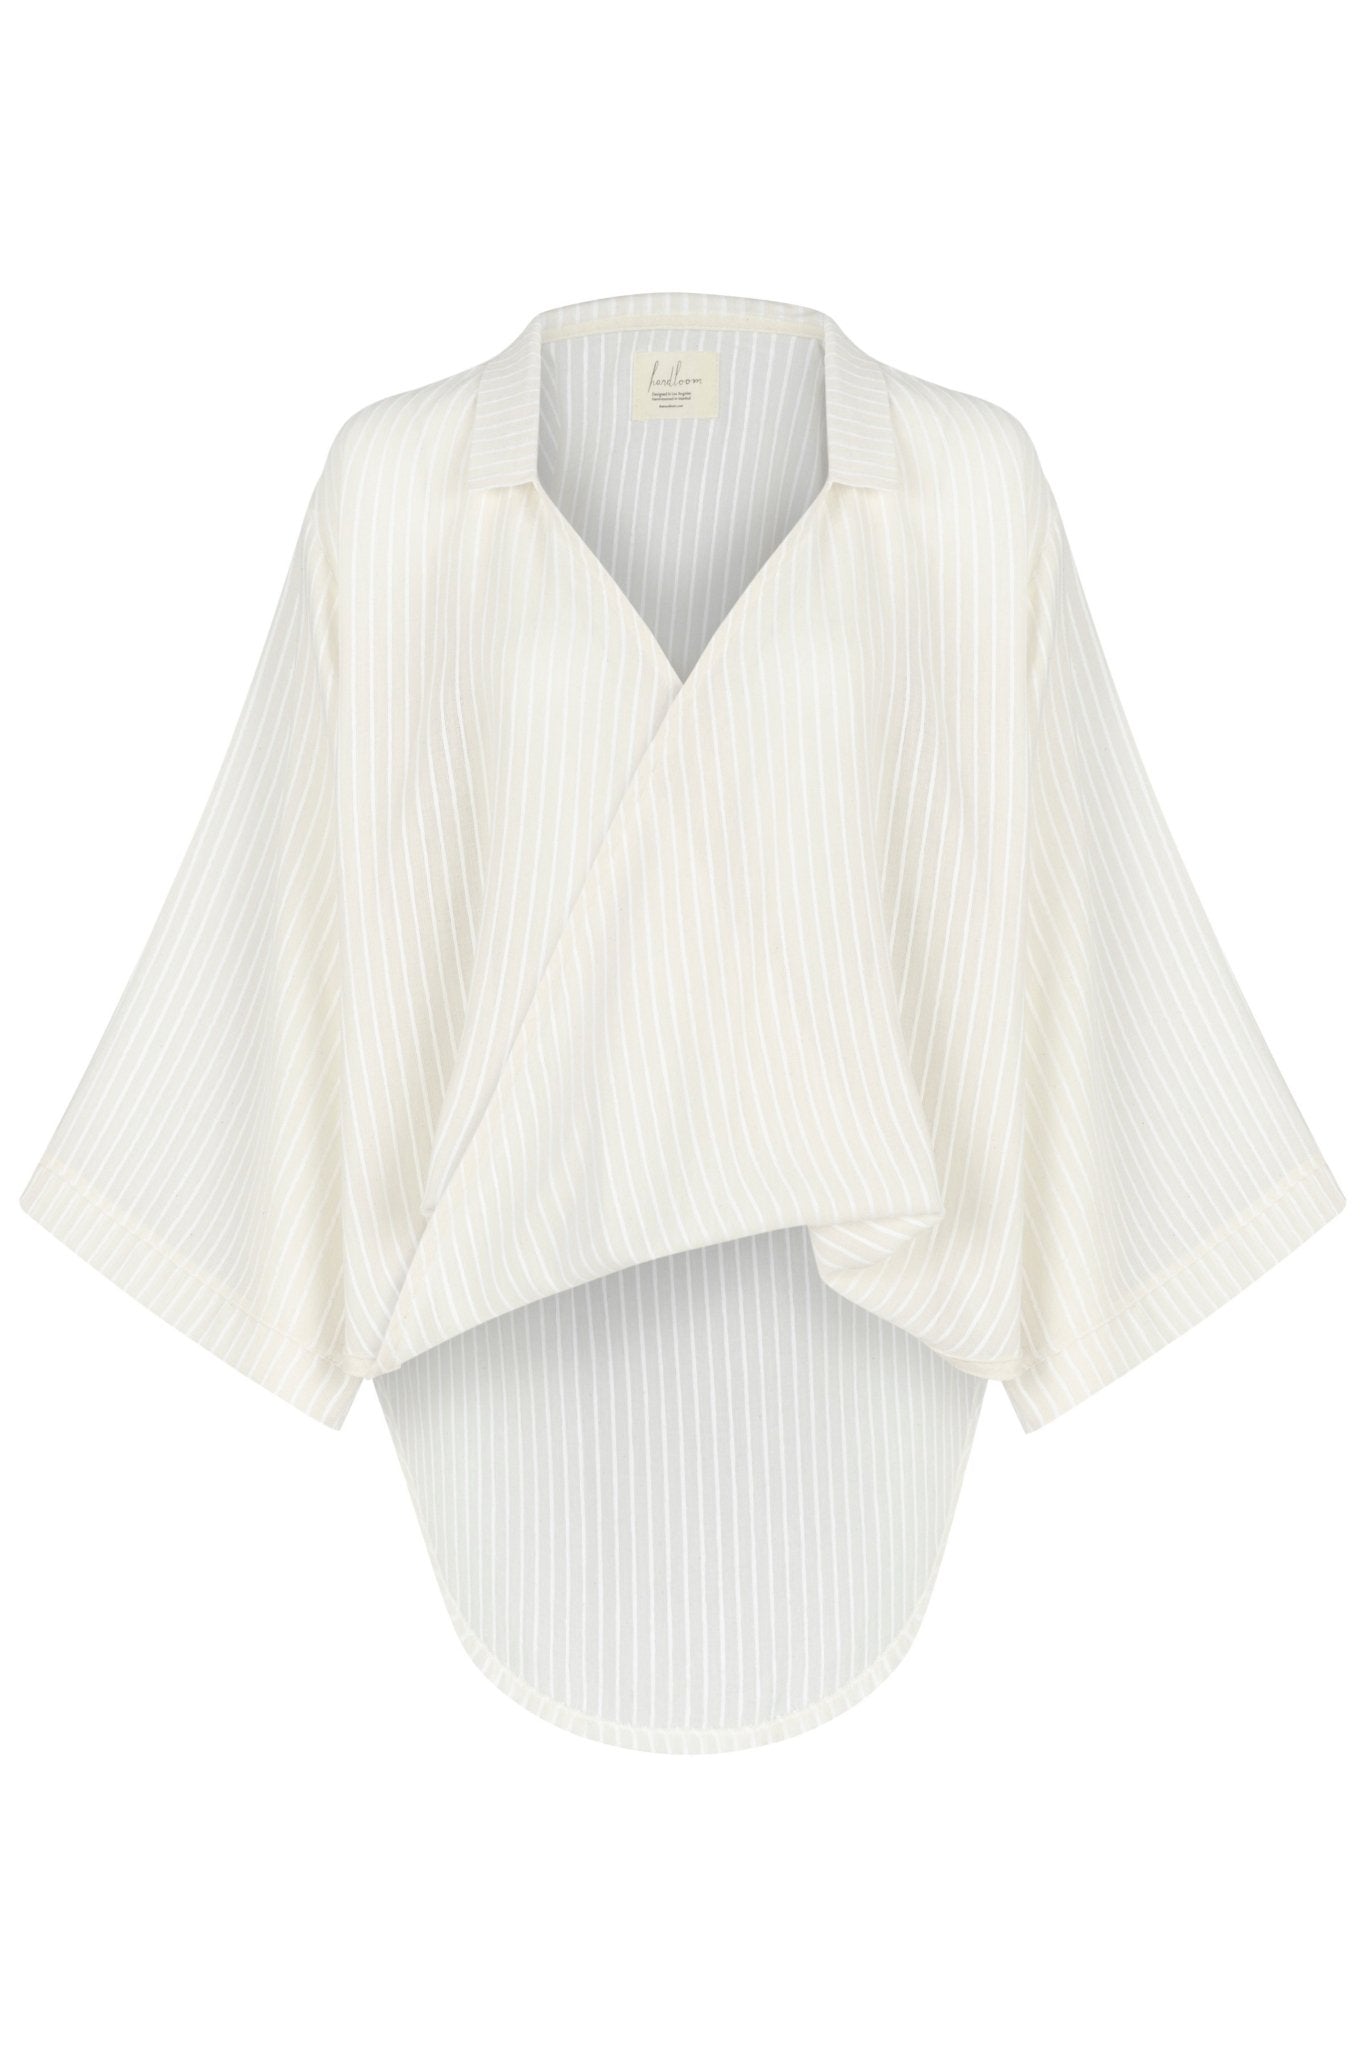 Sade Top - White Stripes by The Handloom